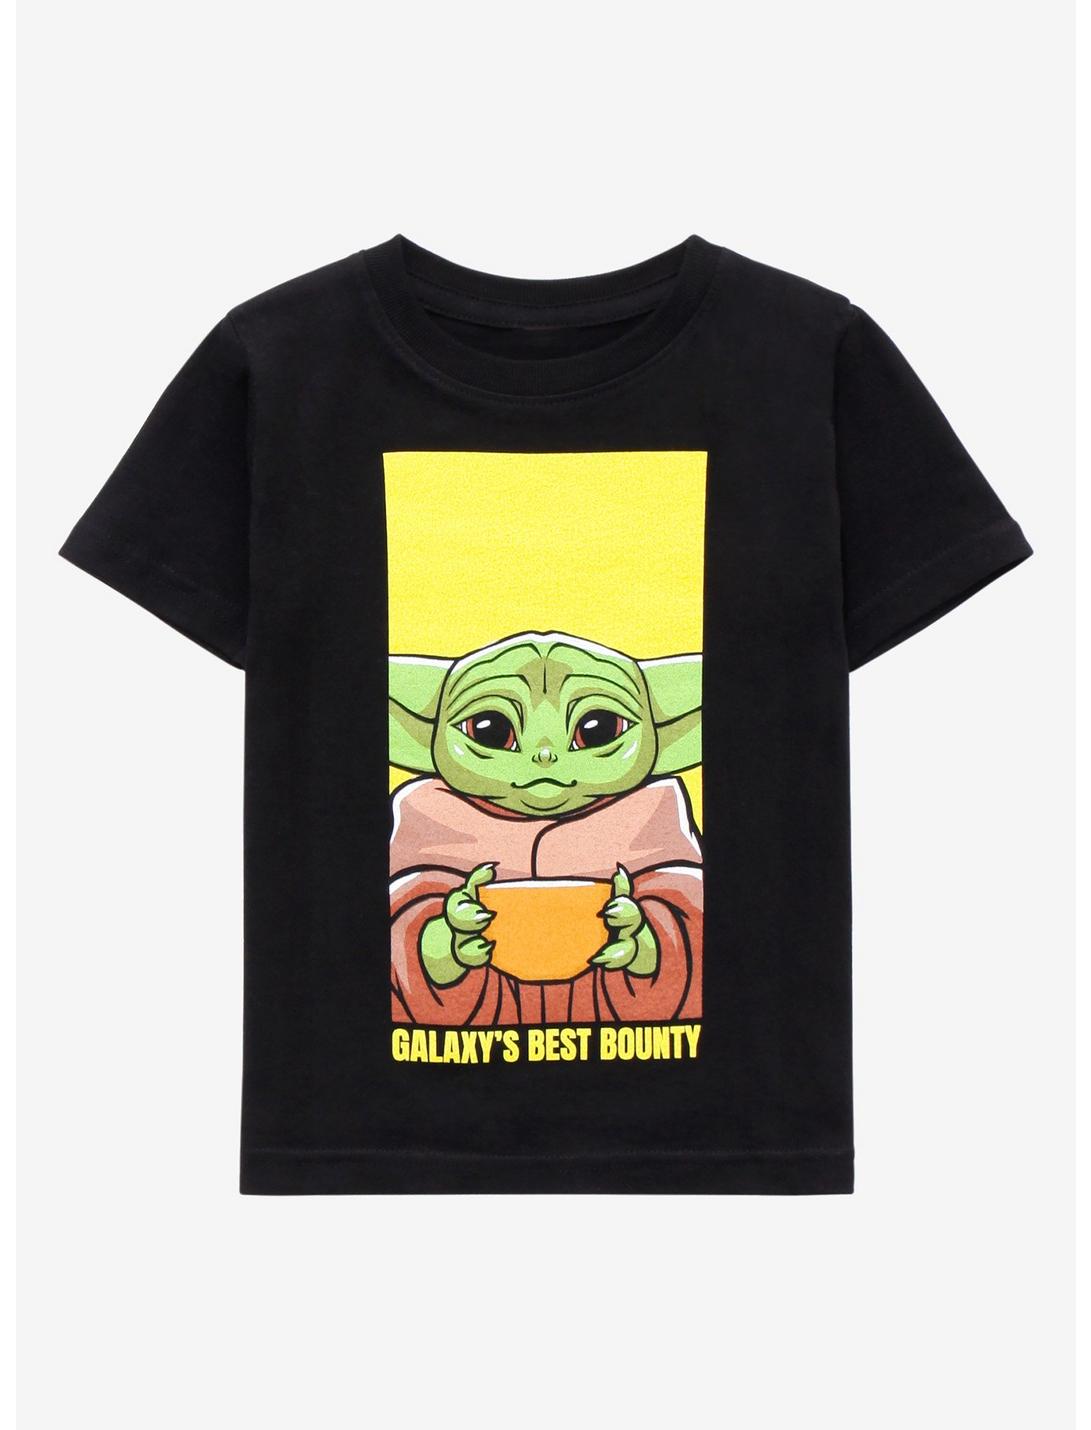 Star Wars The Mandalorian Galaxy's Best Bounty Toddler T-Shirt - BoxLunch Exclusive, BLACK, hi-res